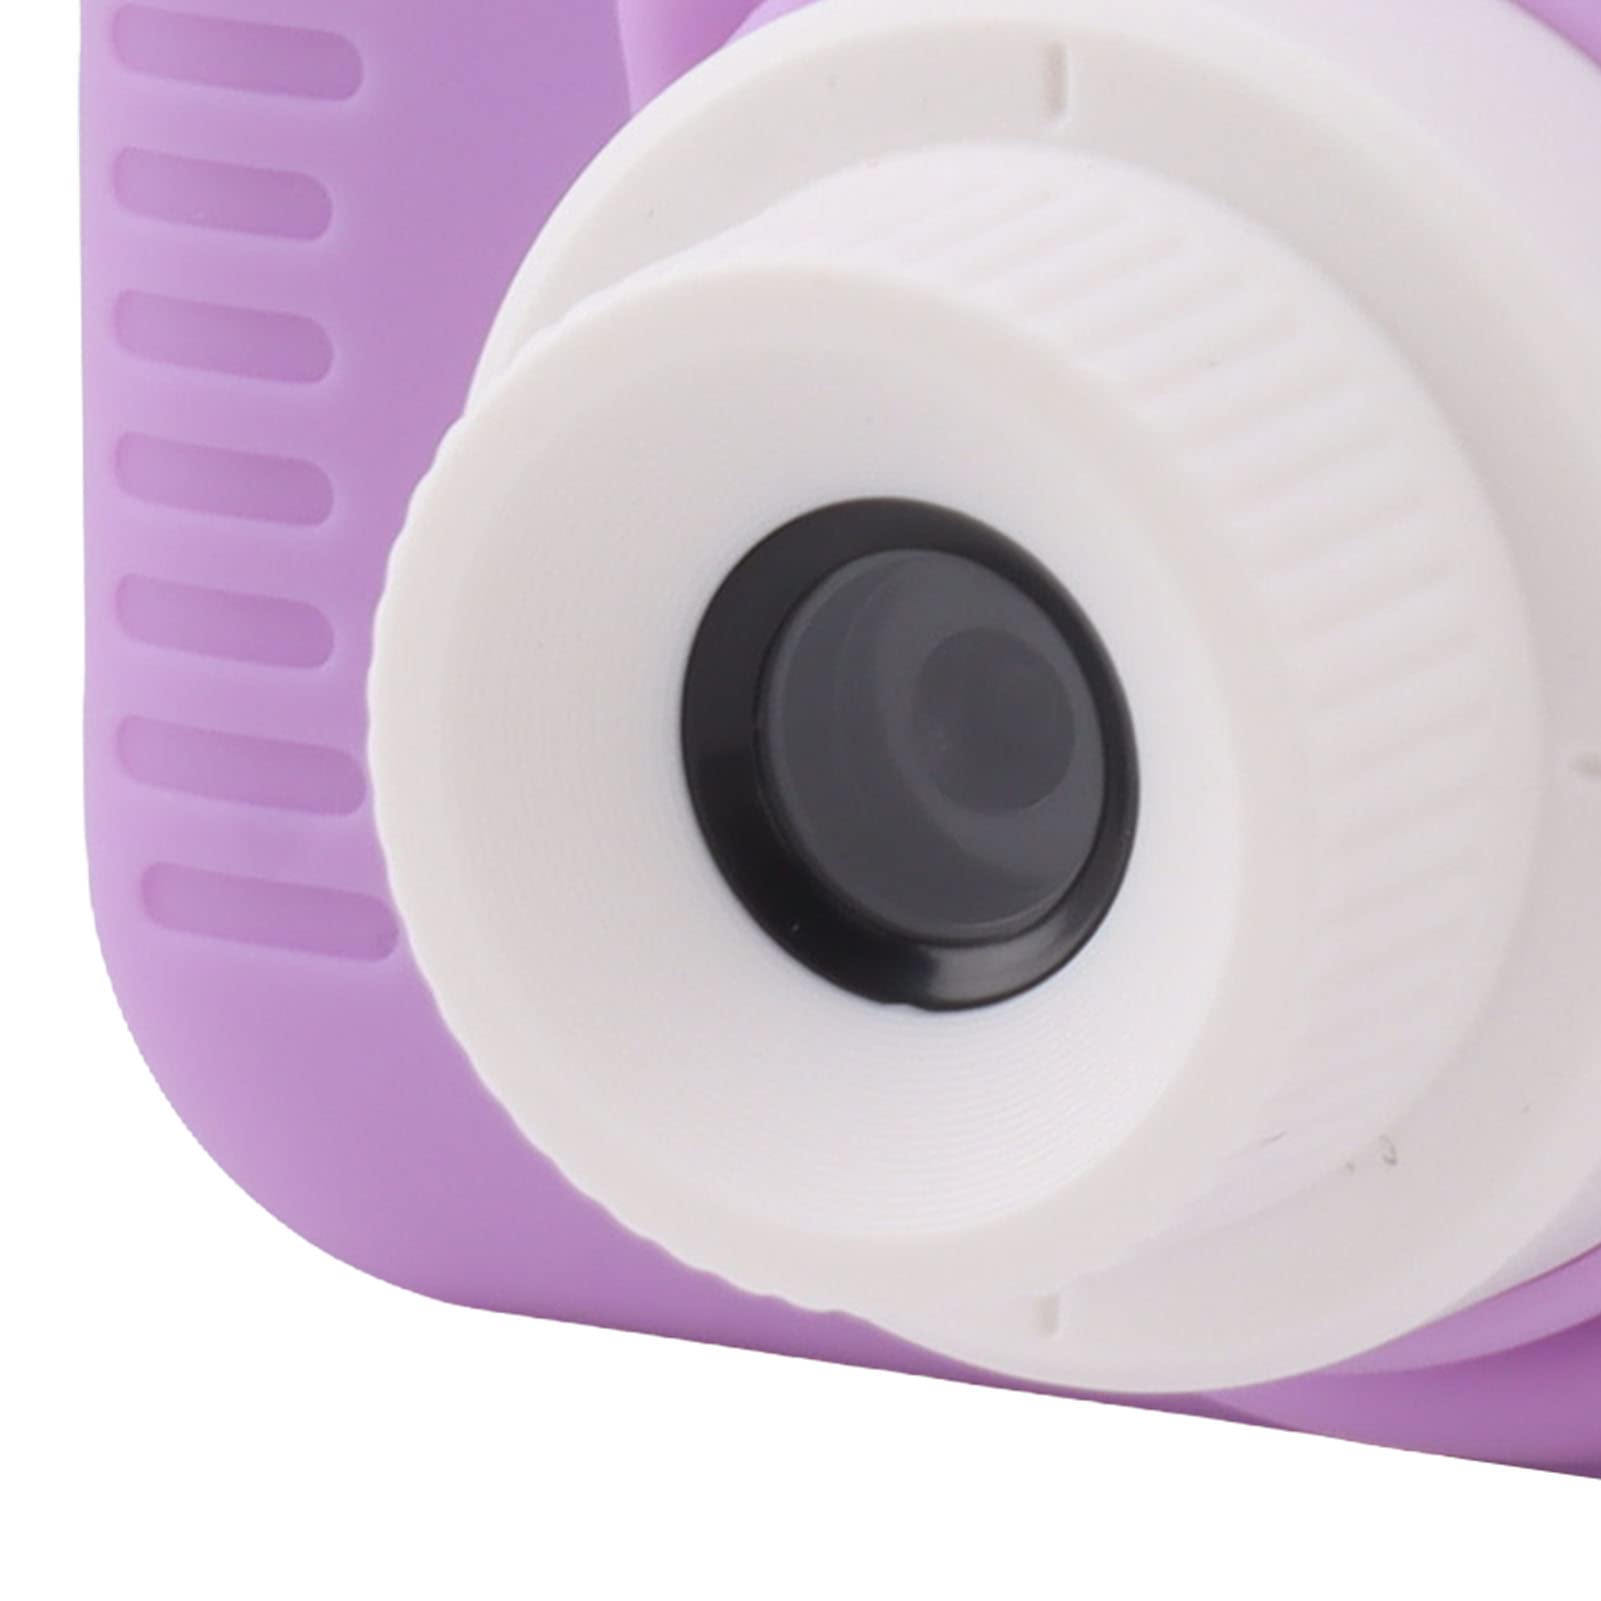 Jopwkuin Selfie Camera Toy, Portable Front Rear Lens Kids Digital Camera USB Rechargeable with 32G Card for Outdoor (Purple)